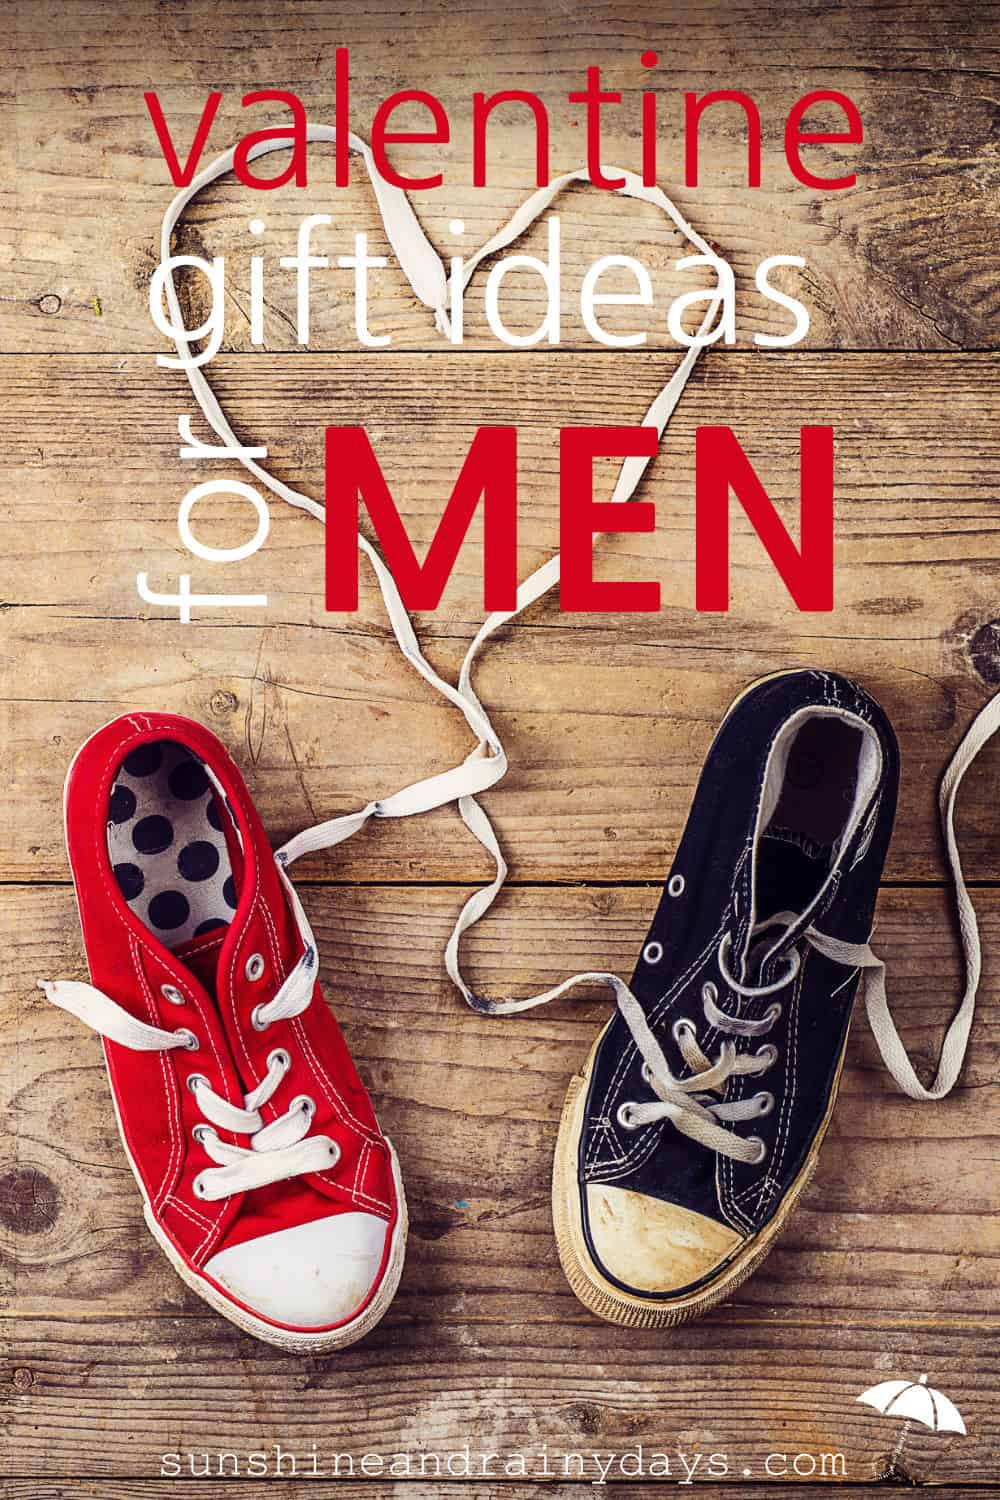 With Valentine's Day around the corner, you may be looking for Valentine Gift Ideas For Men in hopes of finding the right gift idea for your main squeeze!